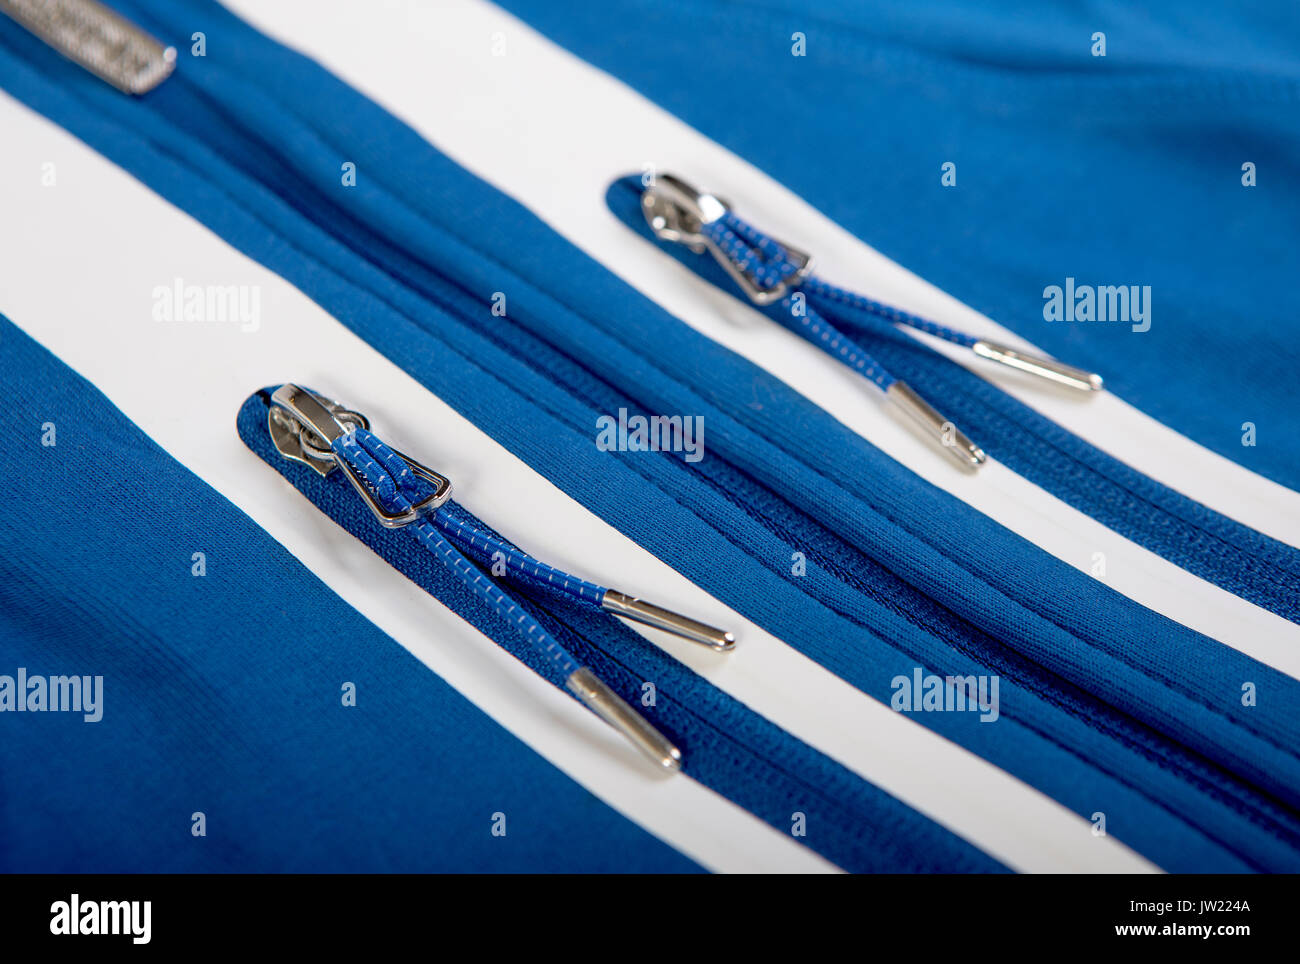 Metal zip closure sports a blue jacket or sweatshirt with pockets and white stripes close-up Stock Photo